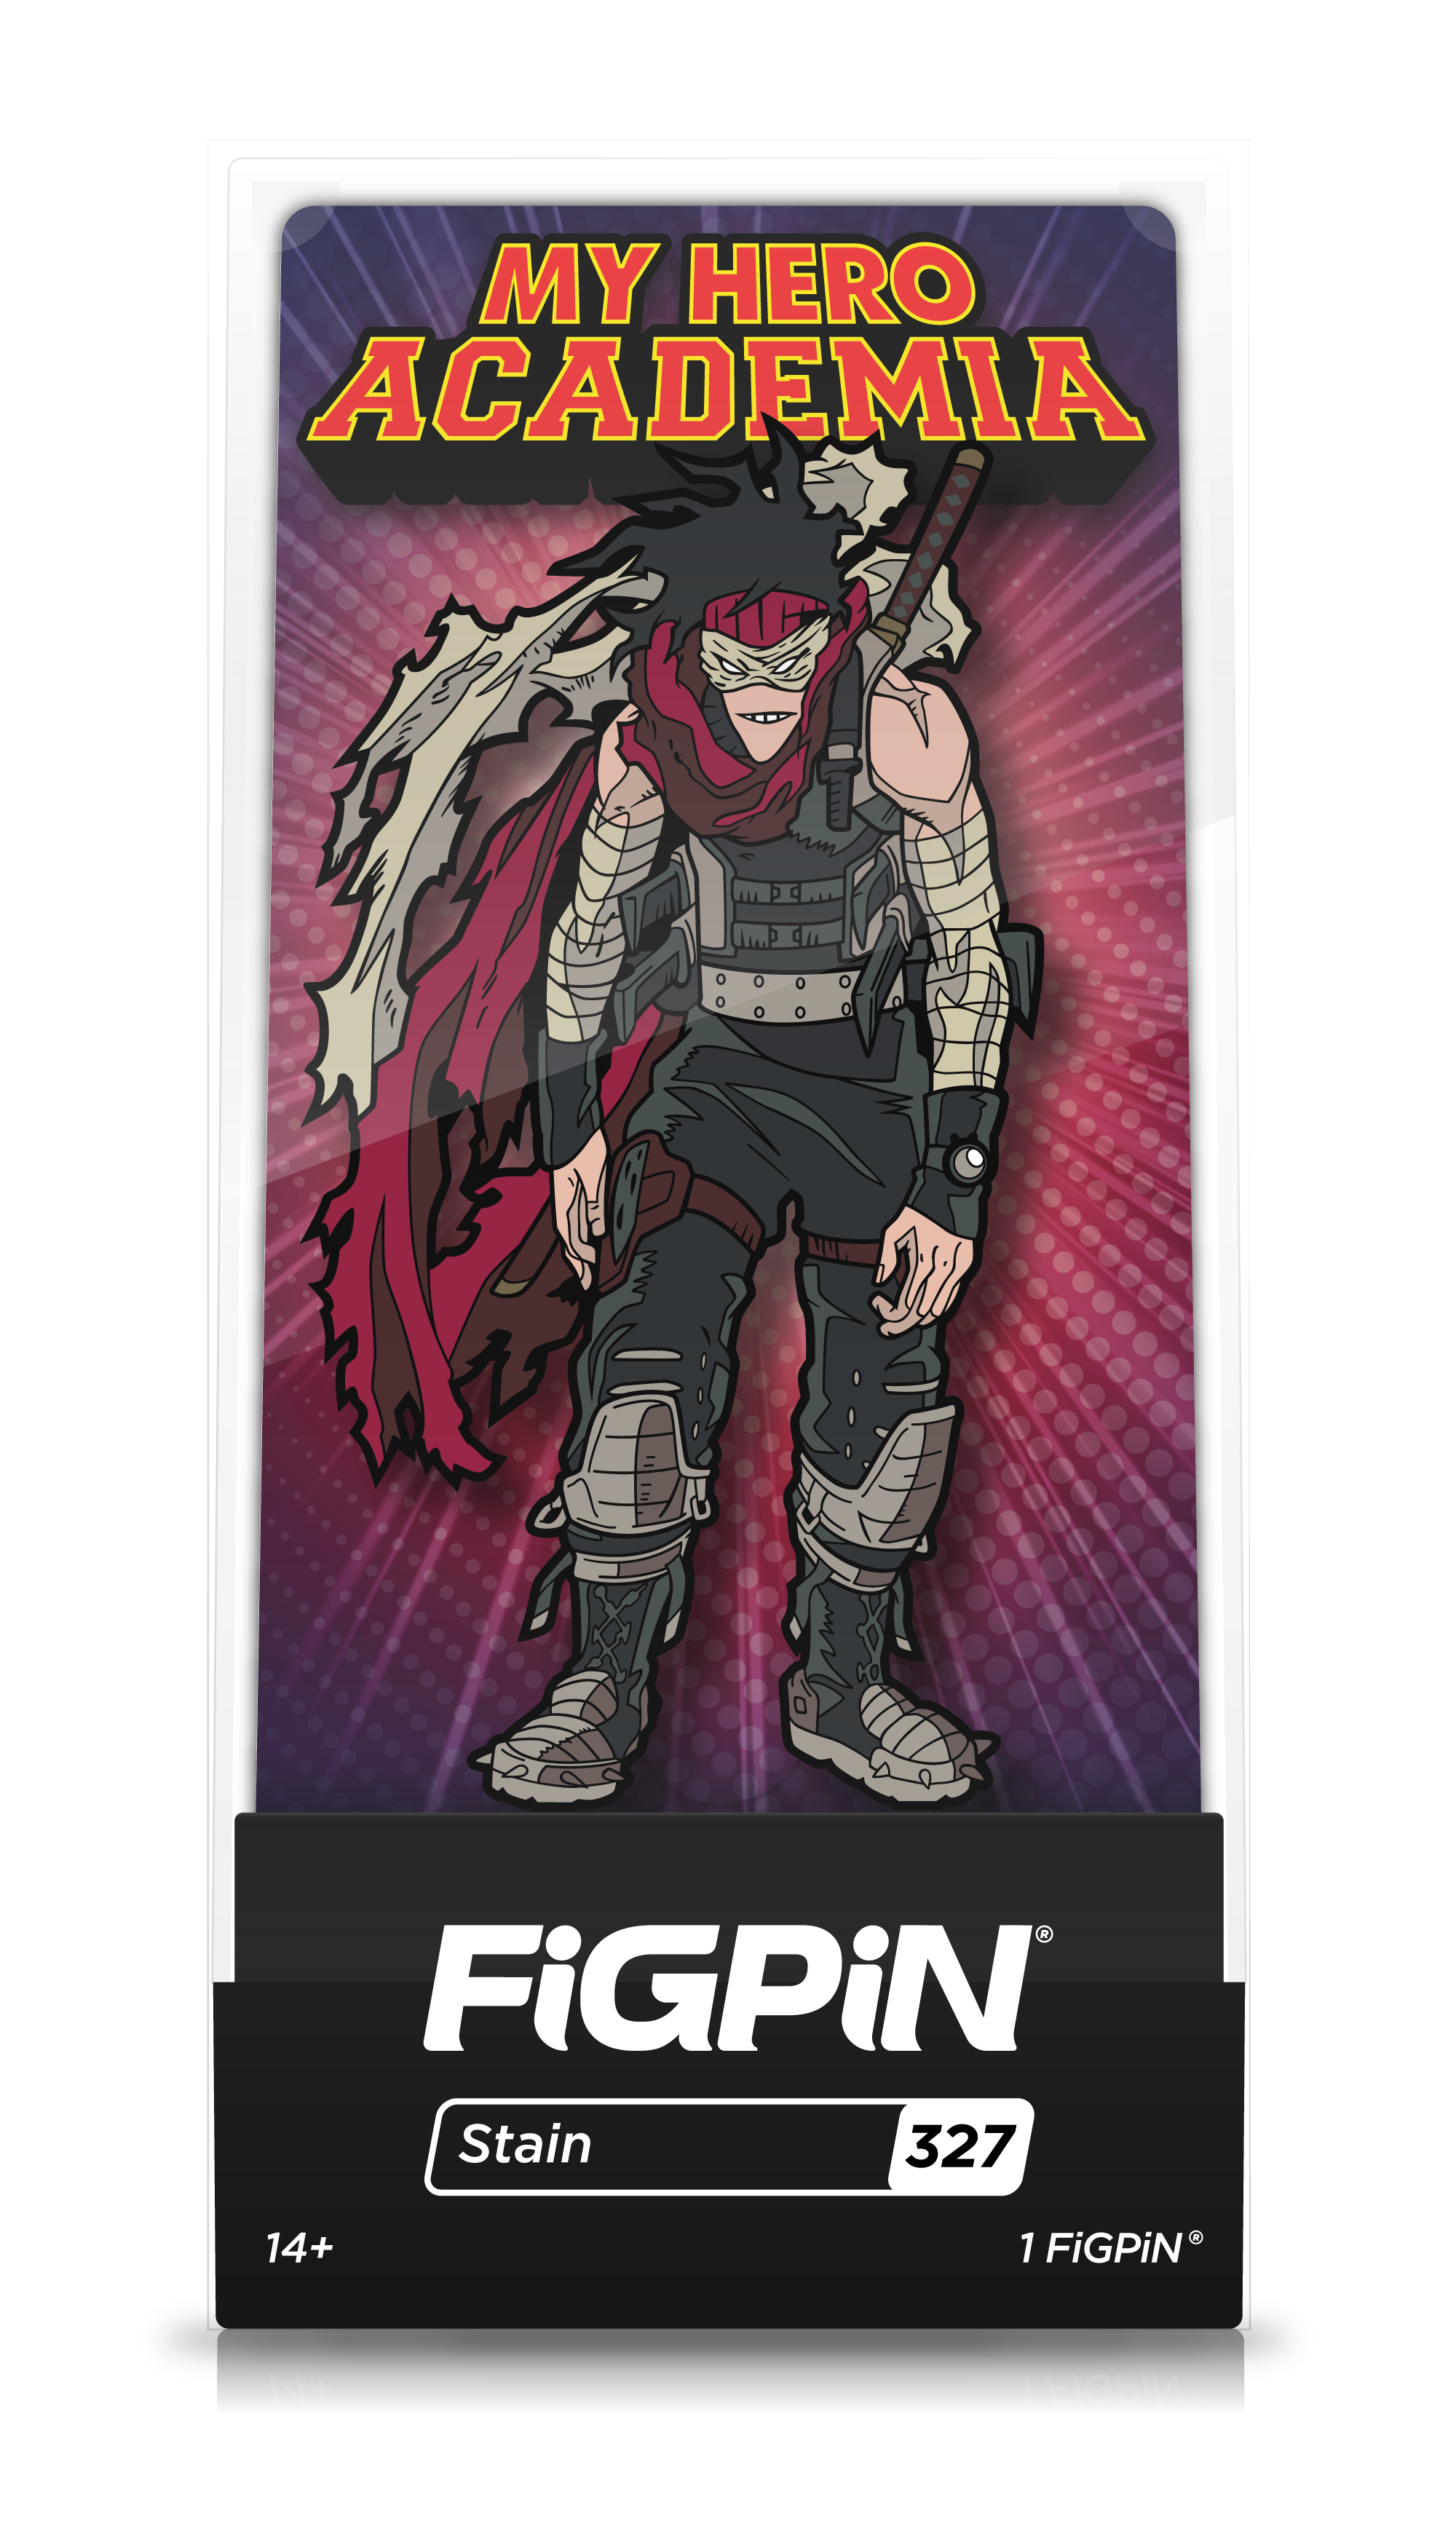 My Hero Academia - Stain FiGPiN (#327) image count 1